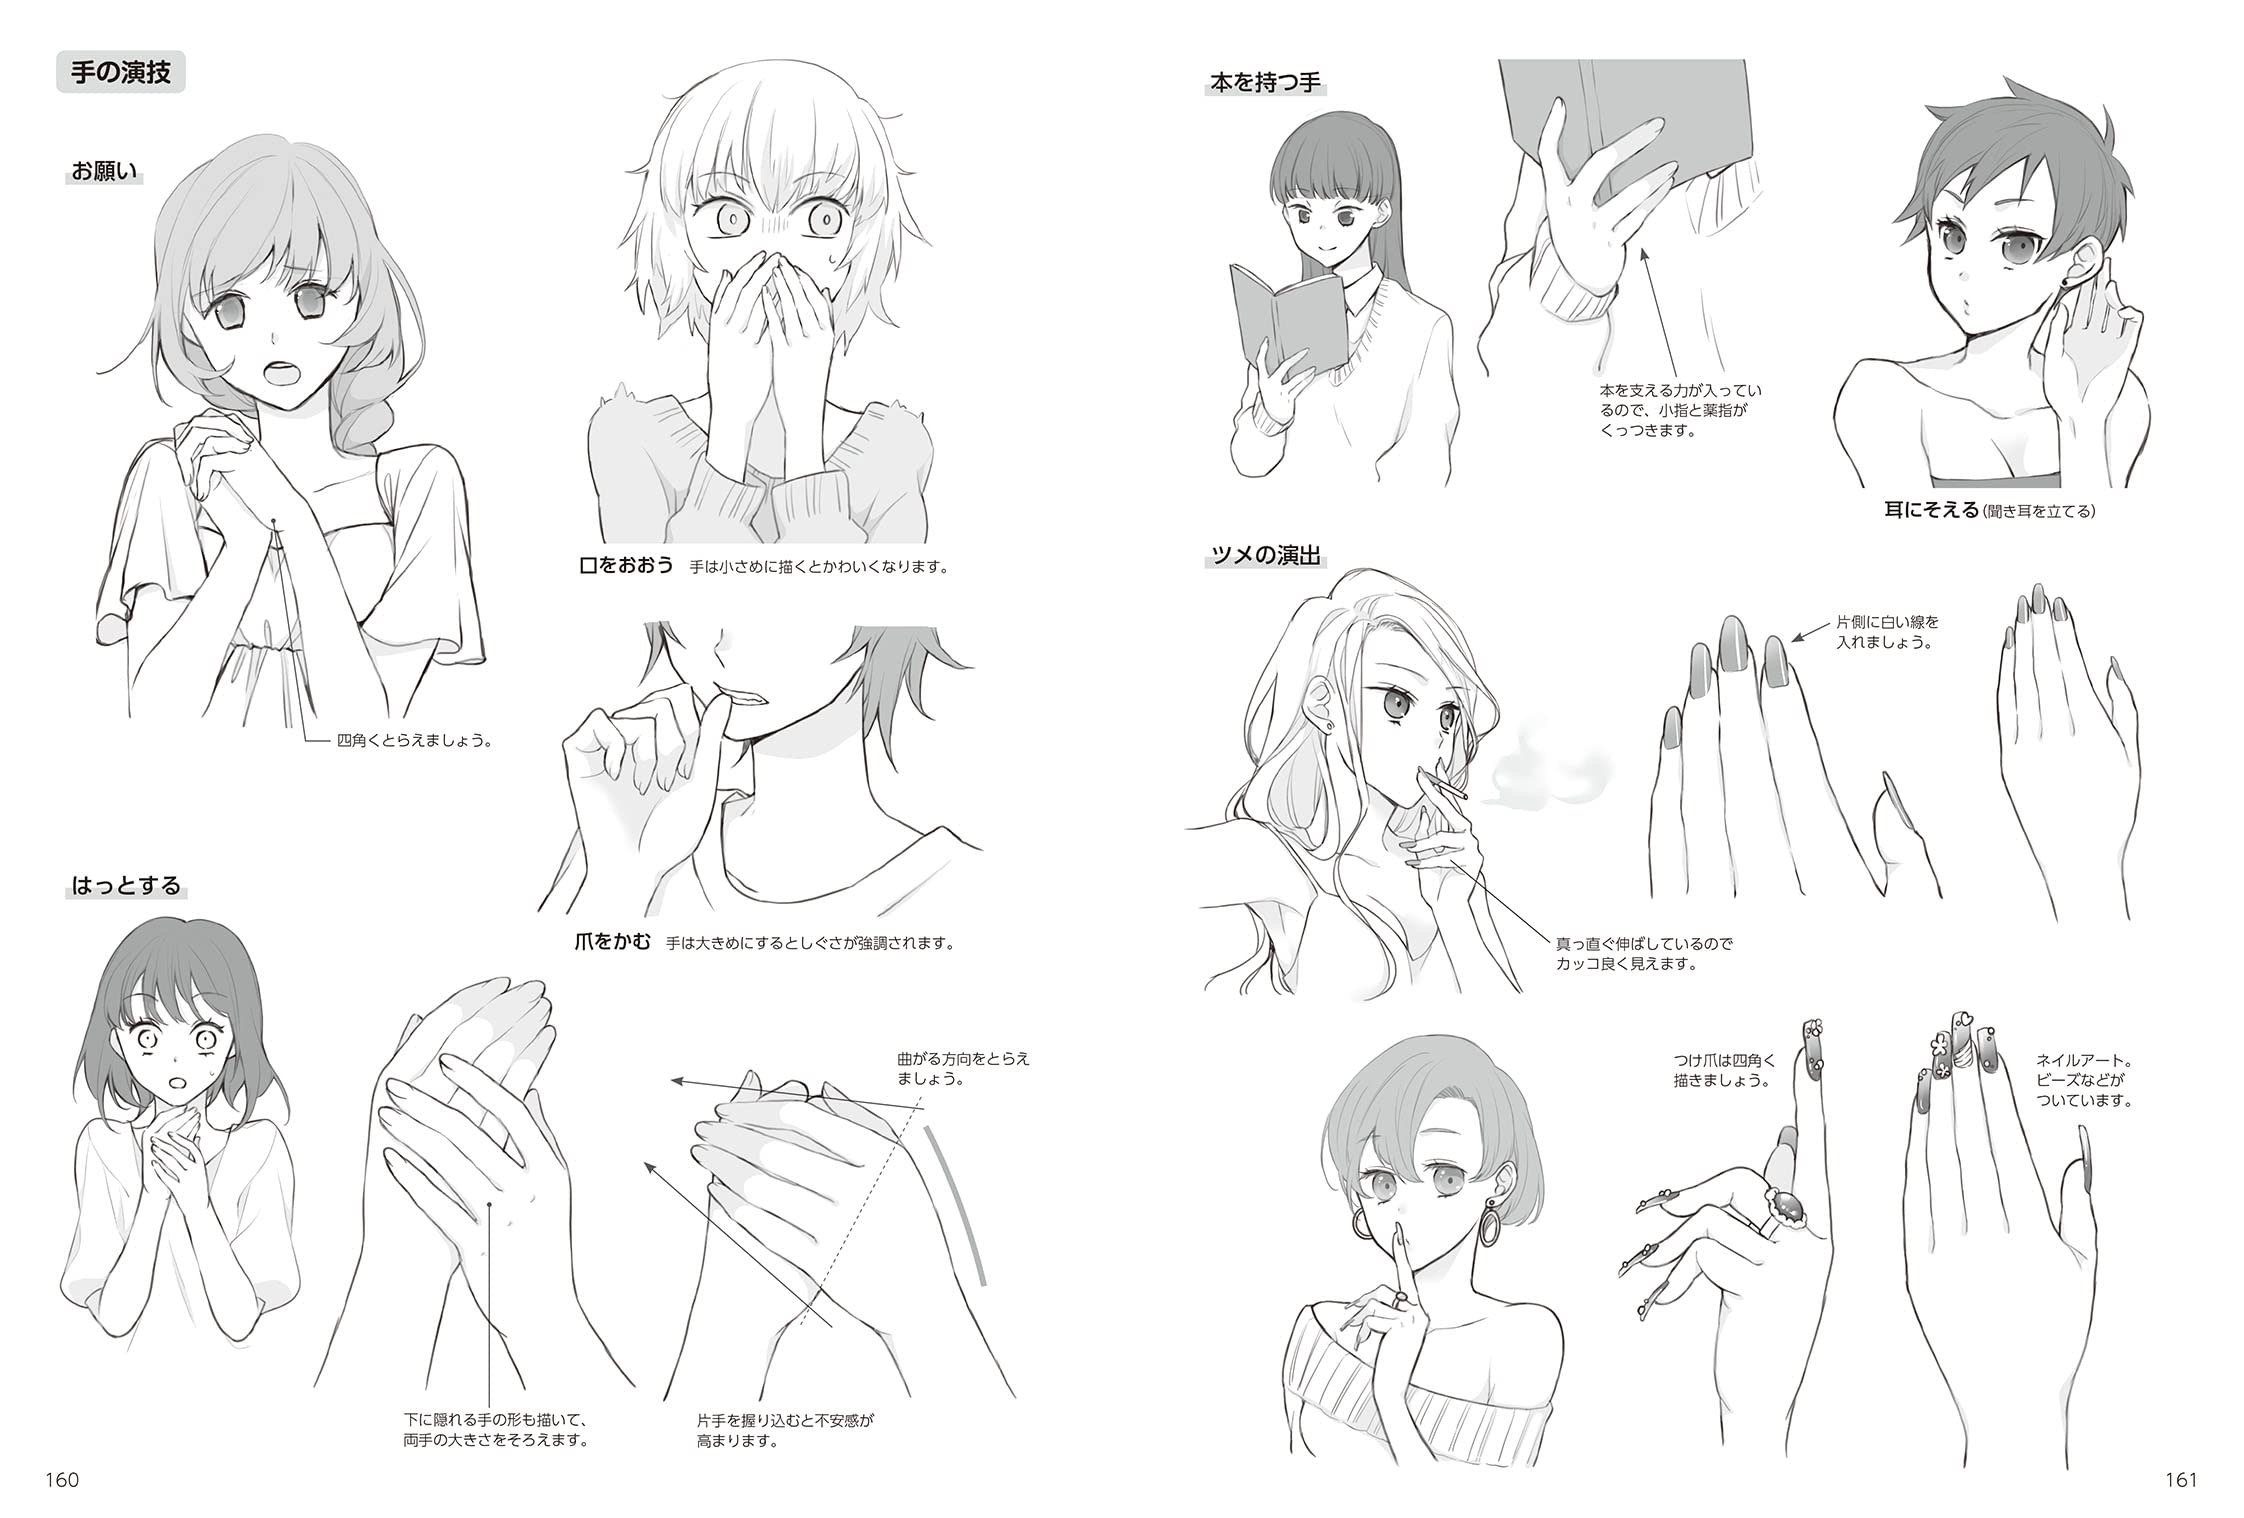 How to Draw a Manga Girl Crying